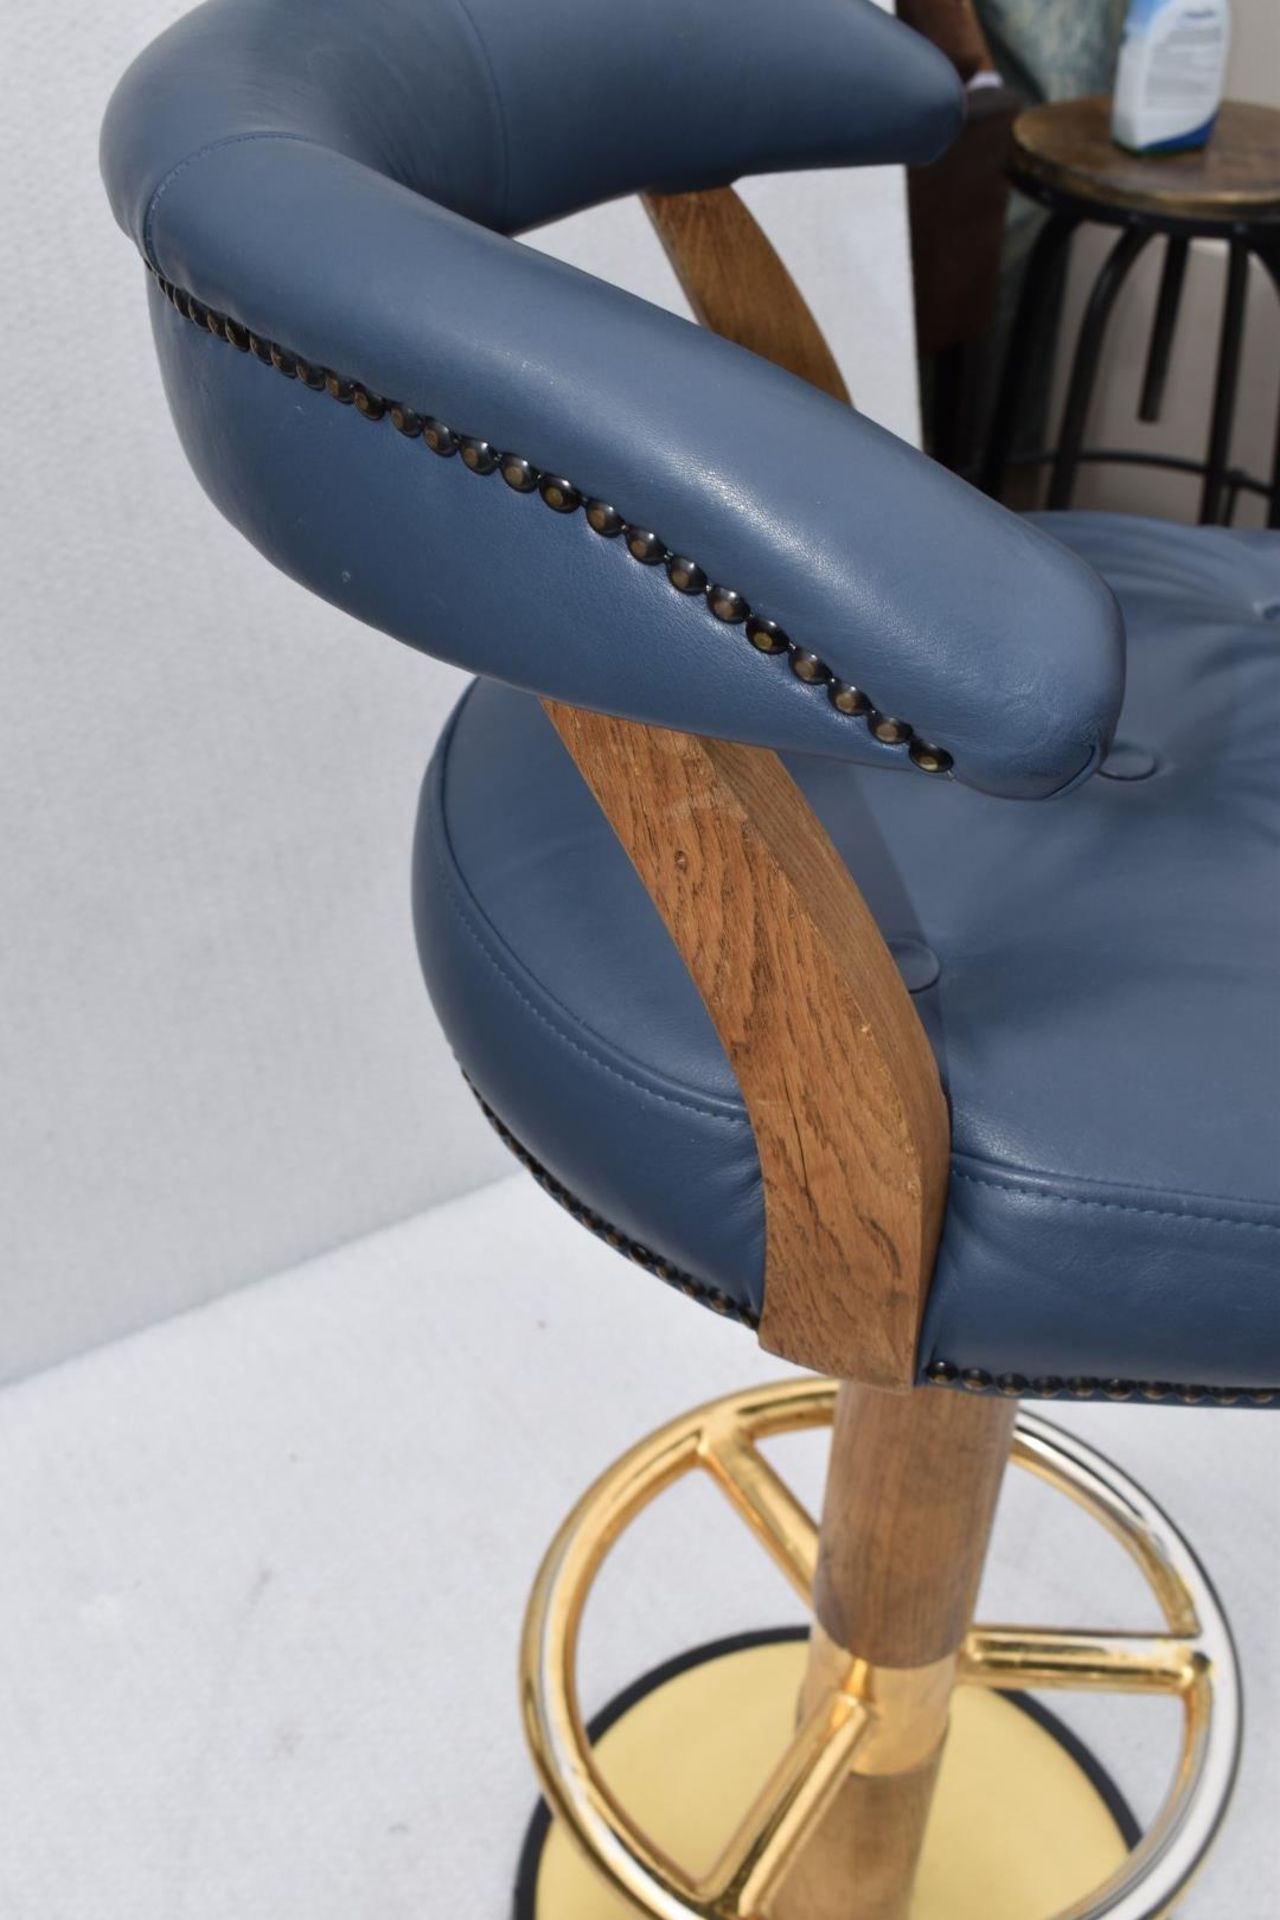 1 x Luxury Buttoned Bar Stool with Wooden Frame, Metal Base, Footrest and Studded Upholstery in a - Image 6 of 6